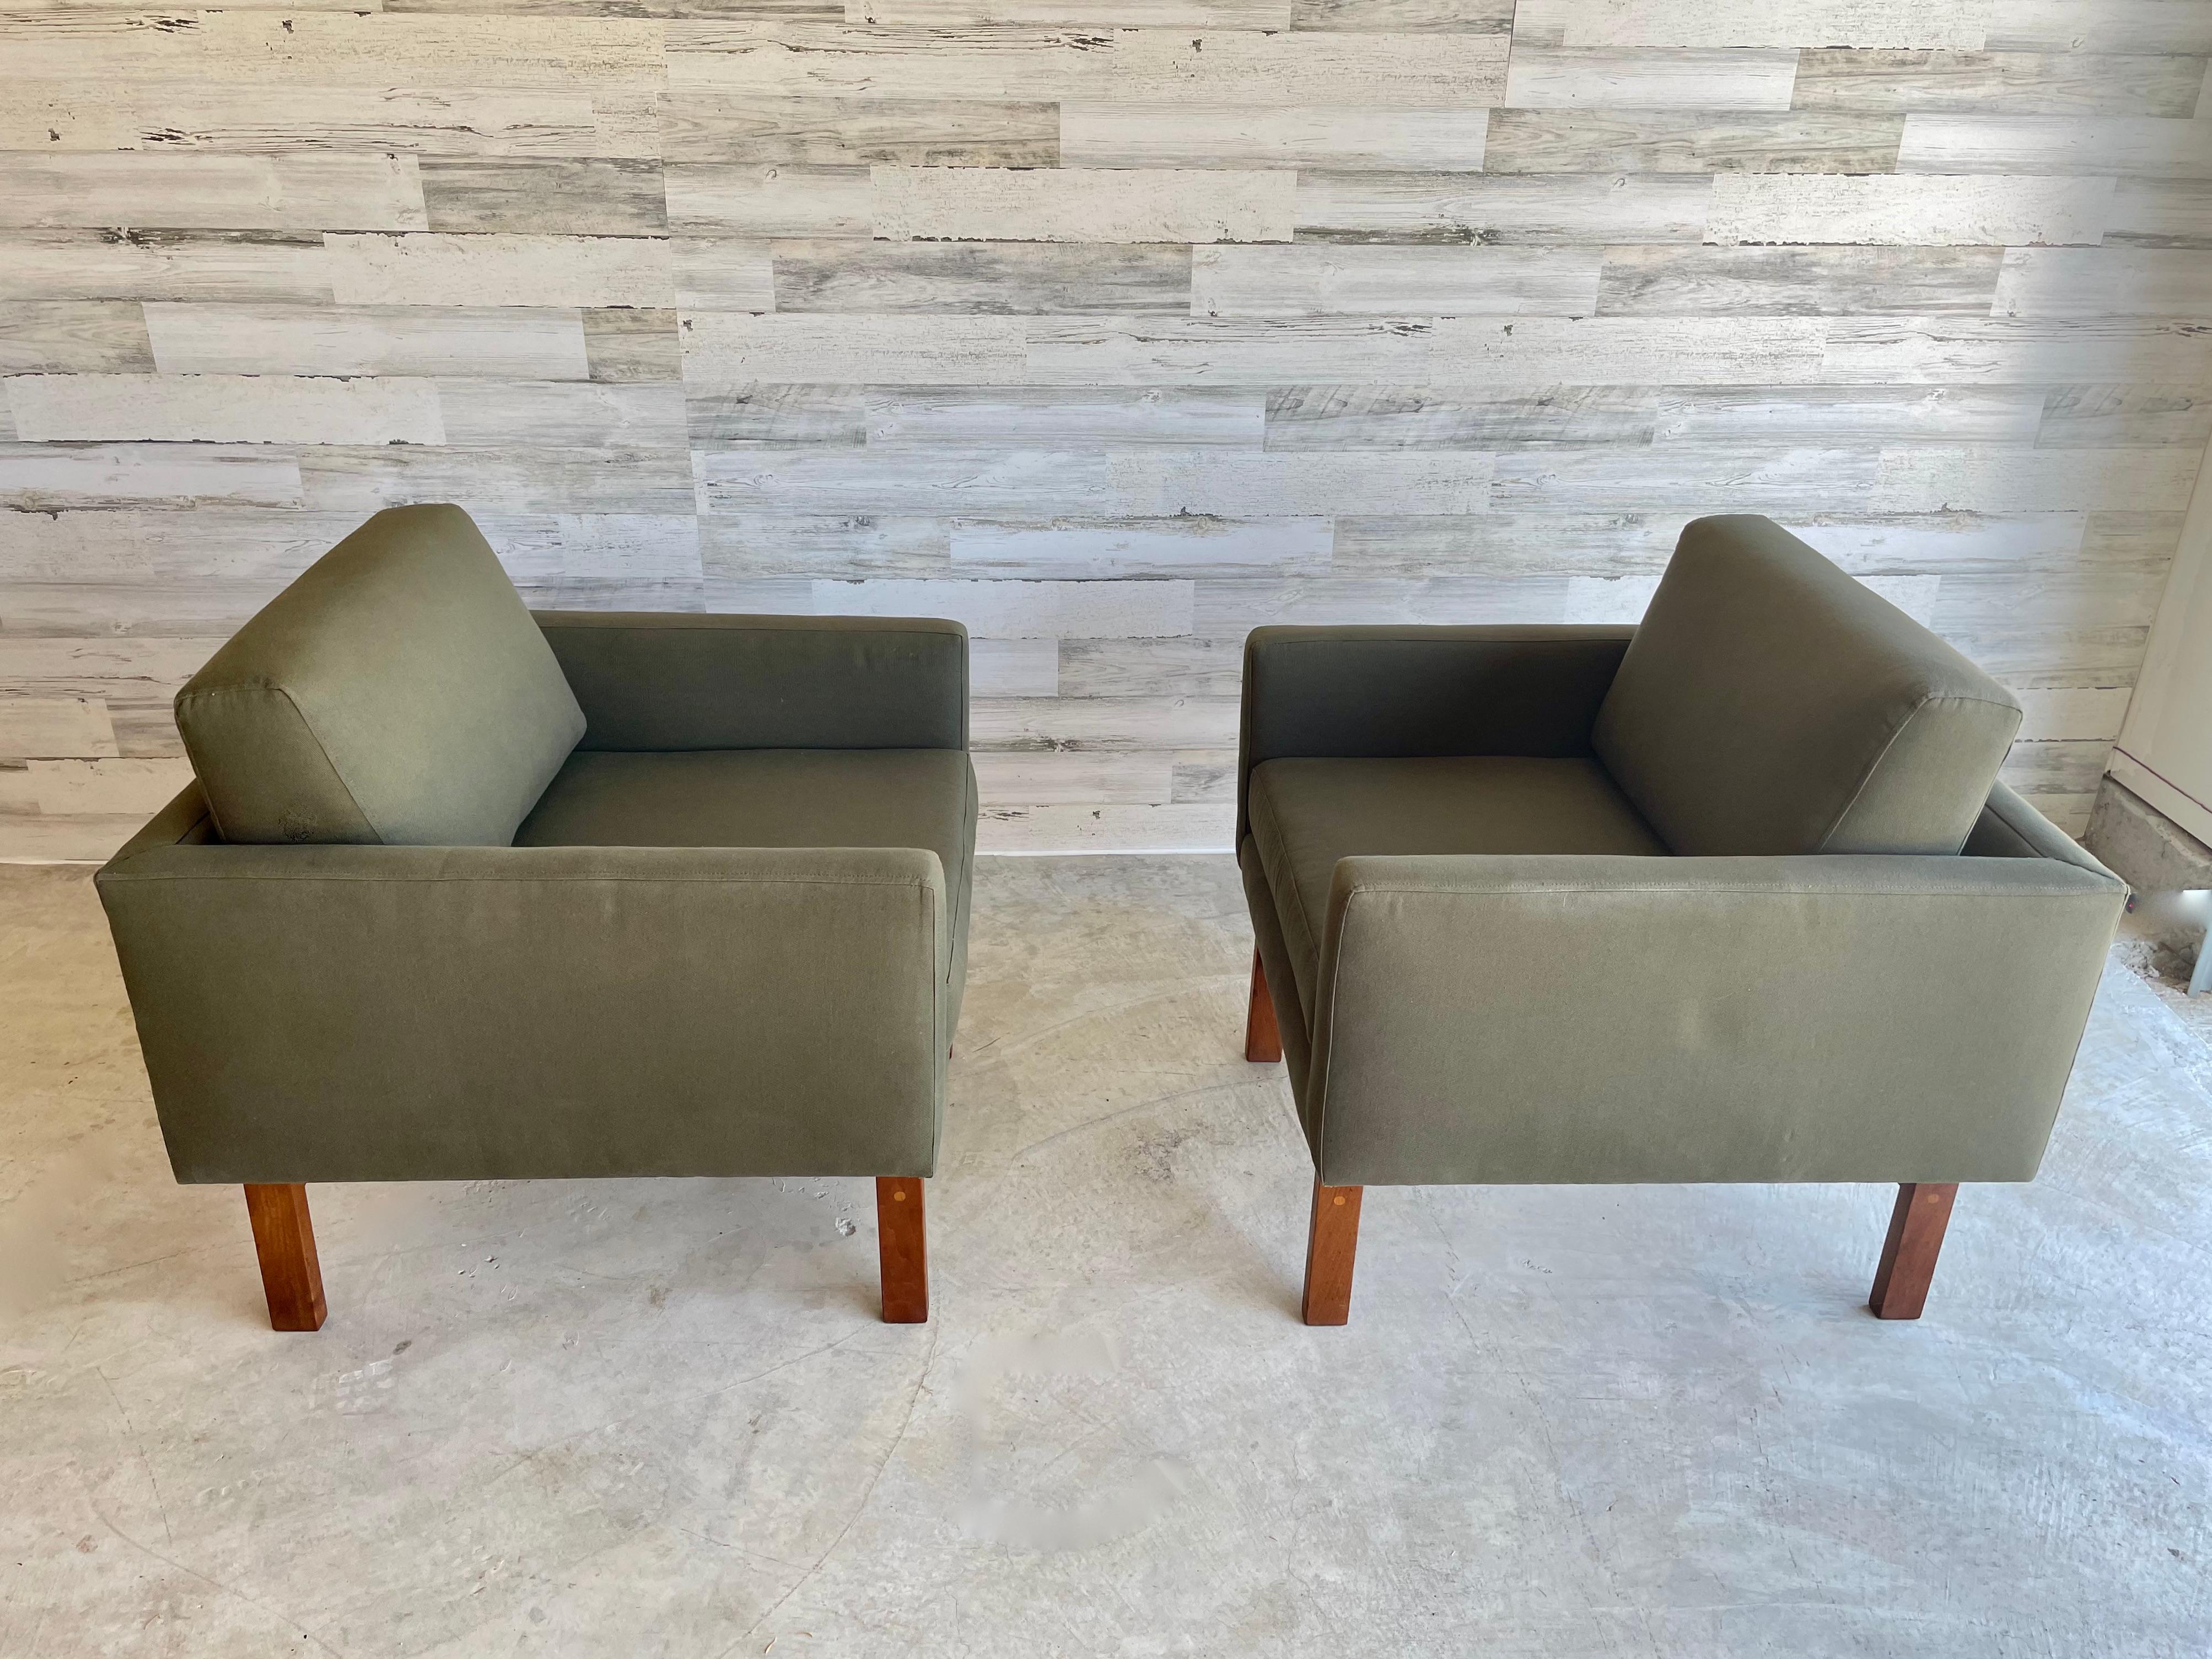 Danish modern cube lounge chairs in an olive green fabric.